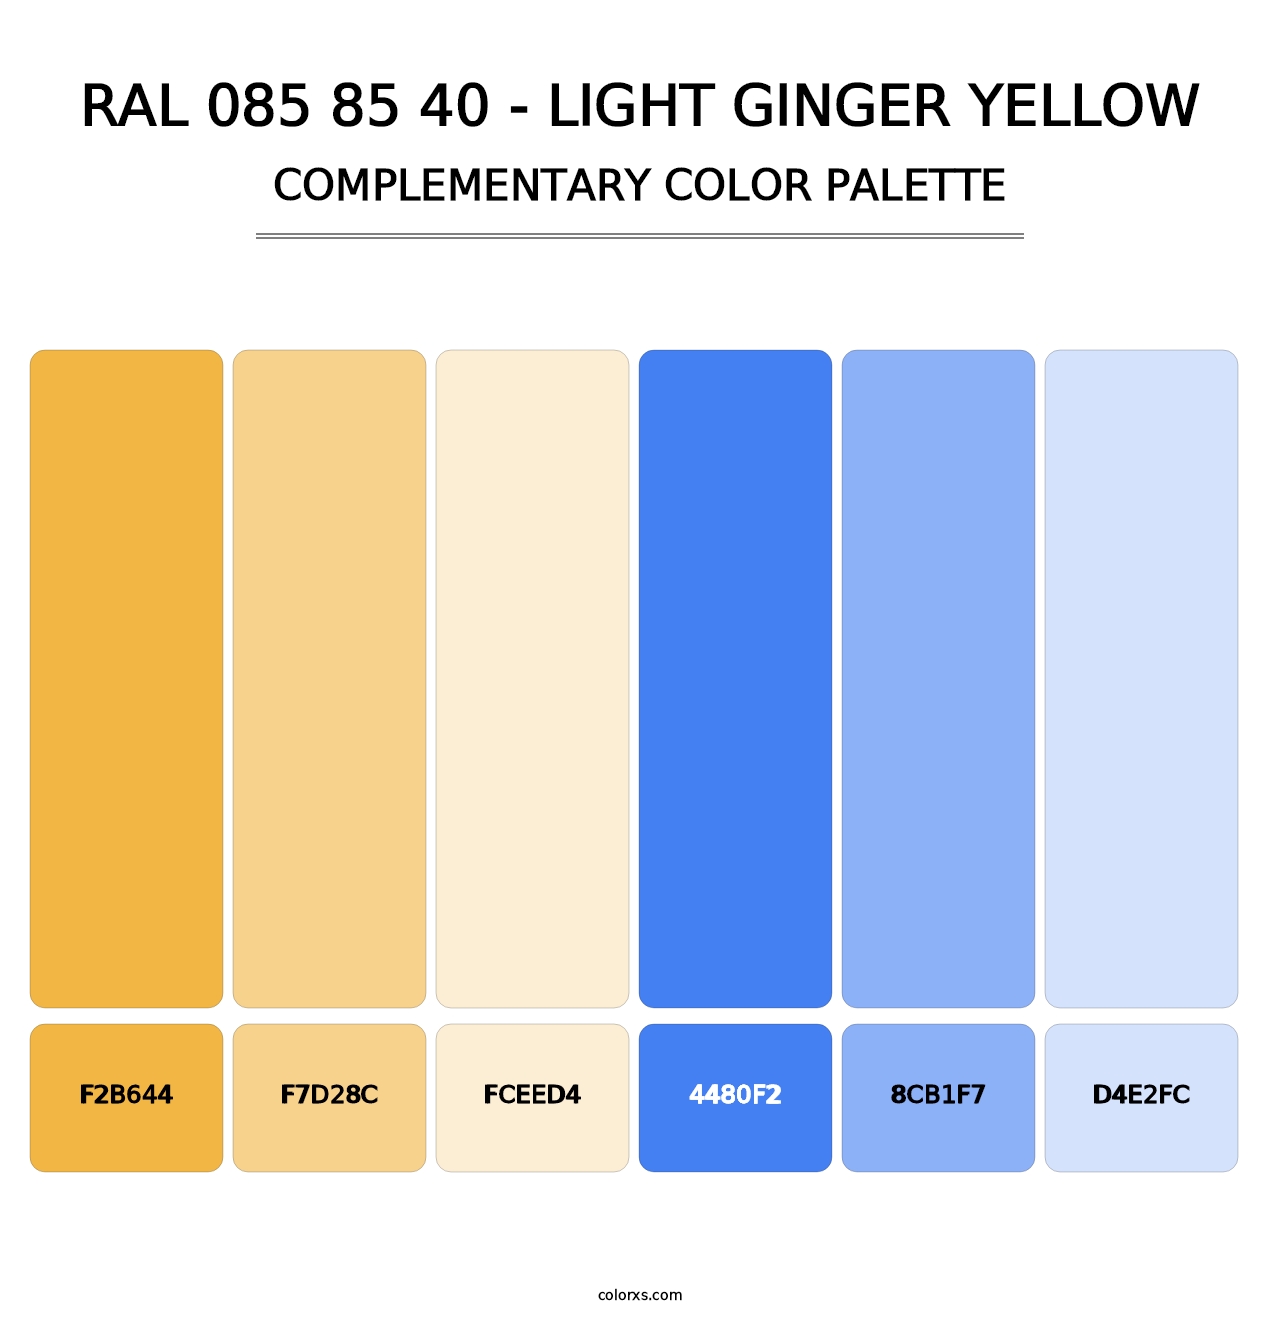 RAL 085 85 40 - Light Ginger Yellow - Complementary Color Palette